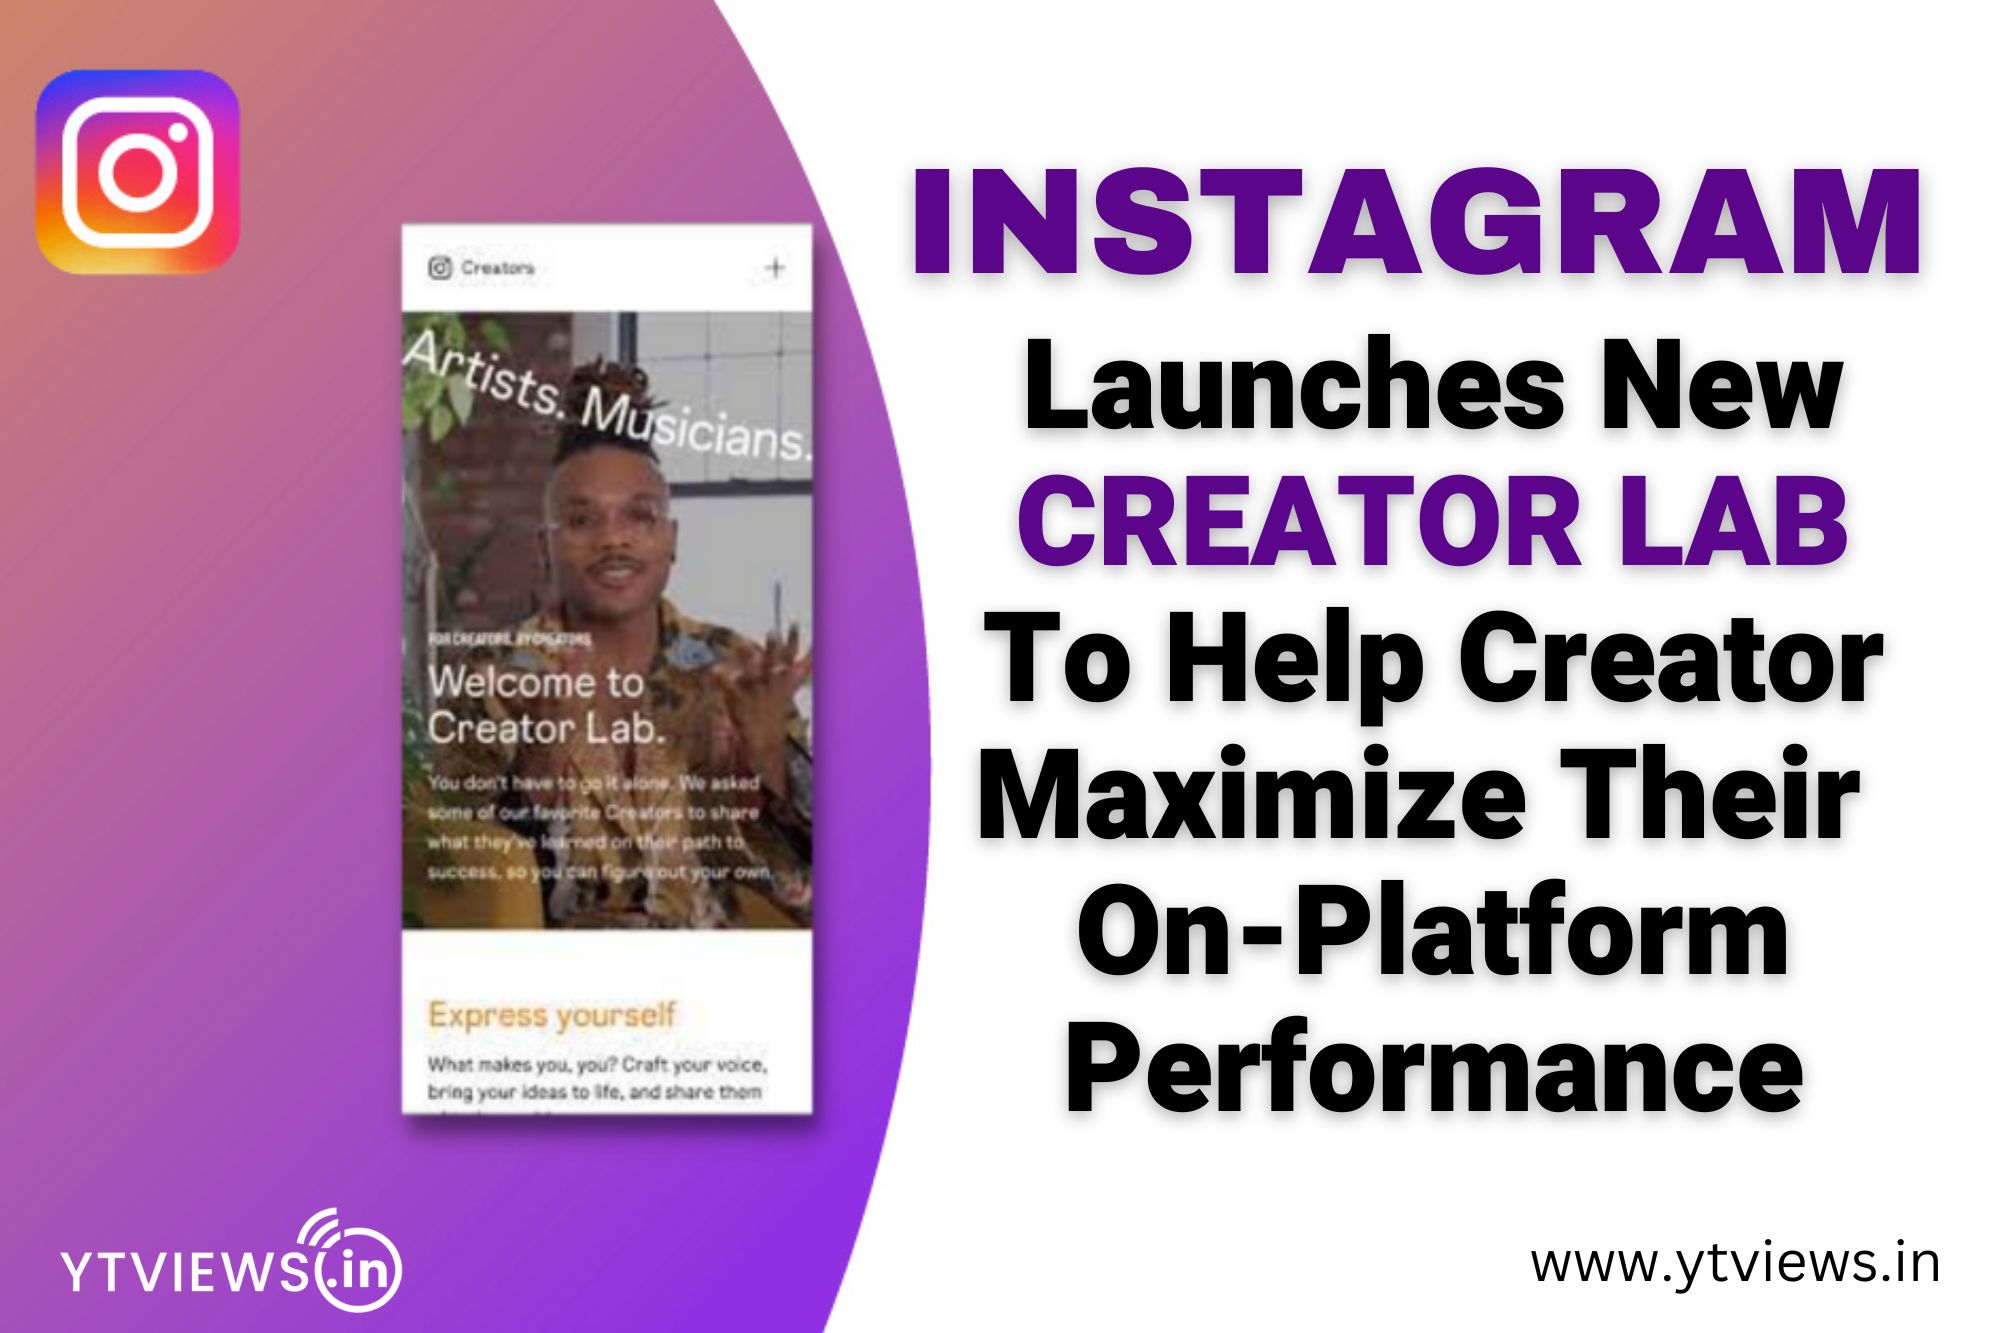 Instagram launches new creator lab to help creators maximize their on-platform performance